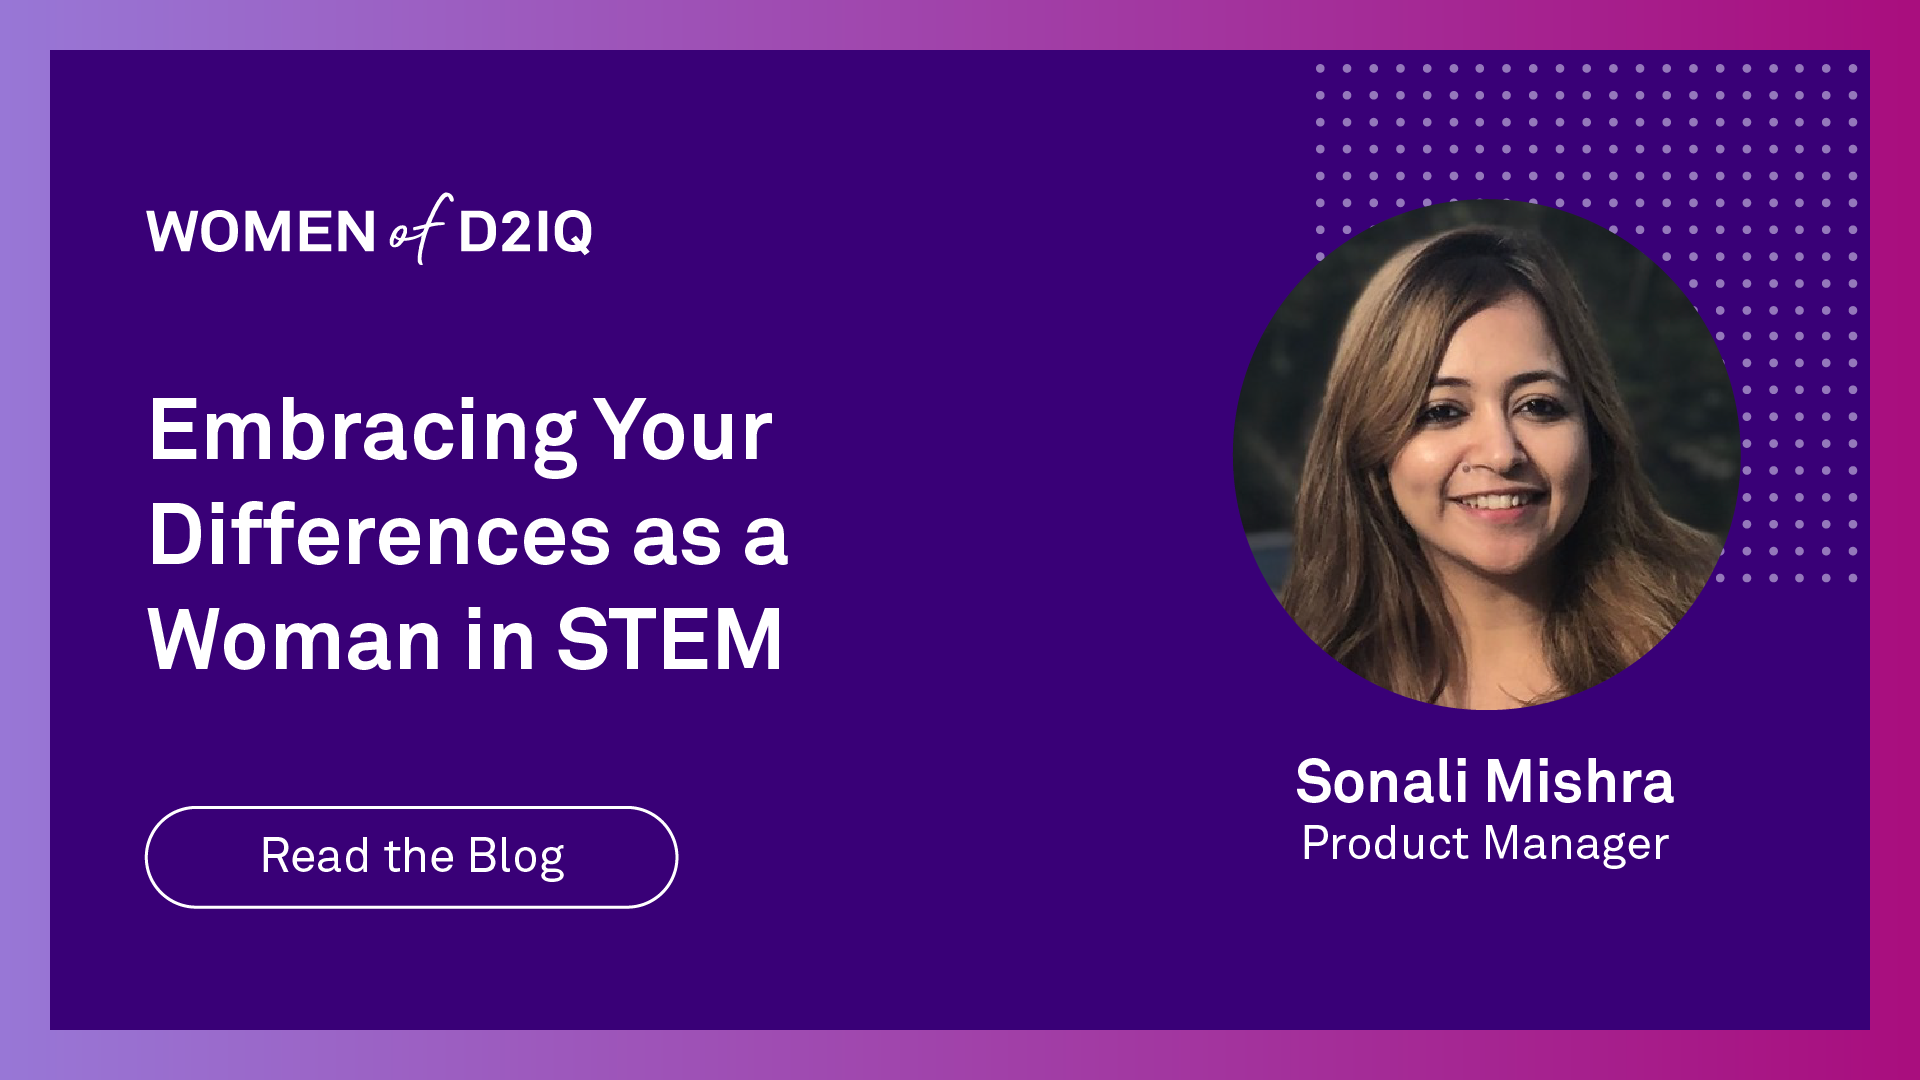 Women of D2iQ: Embracing Your Differences as a Woman in STEM